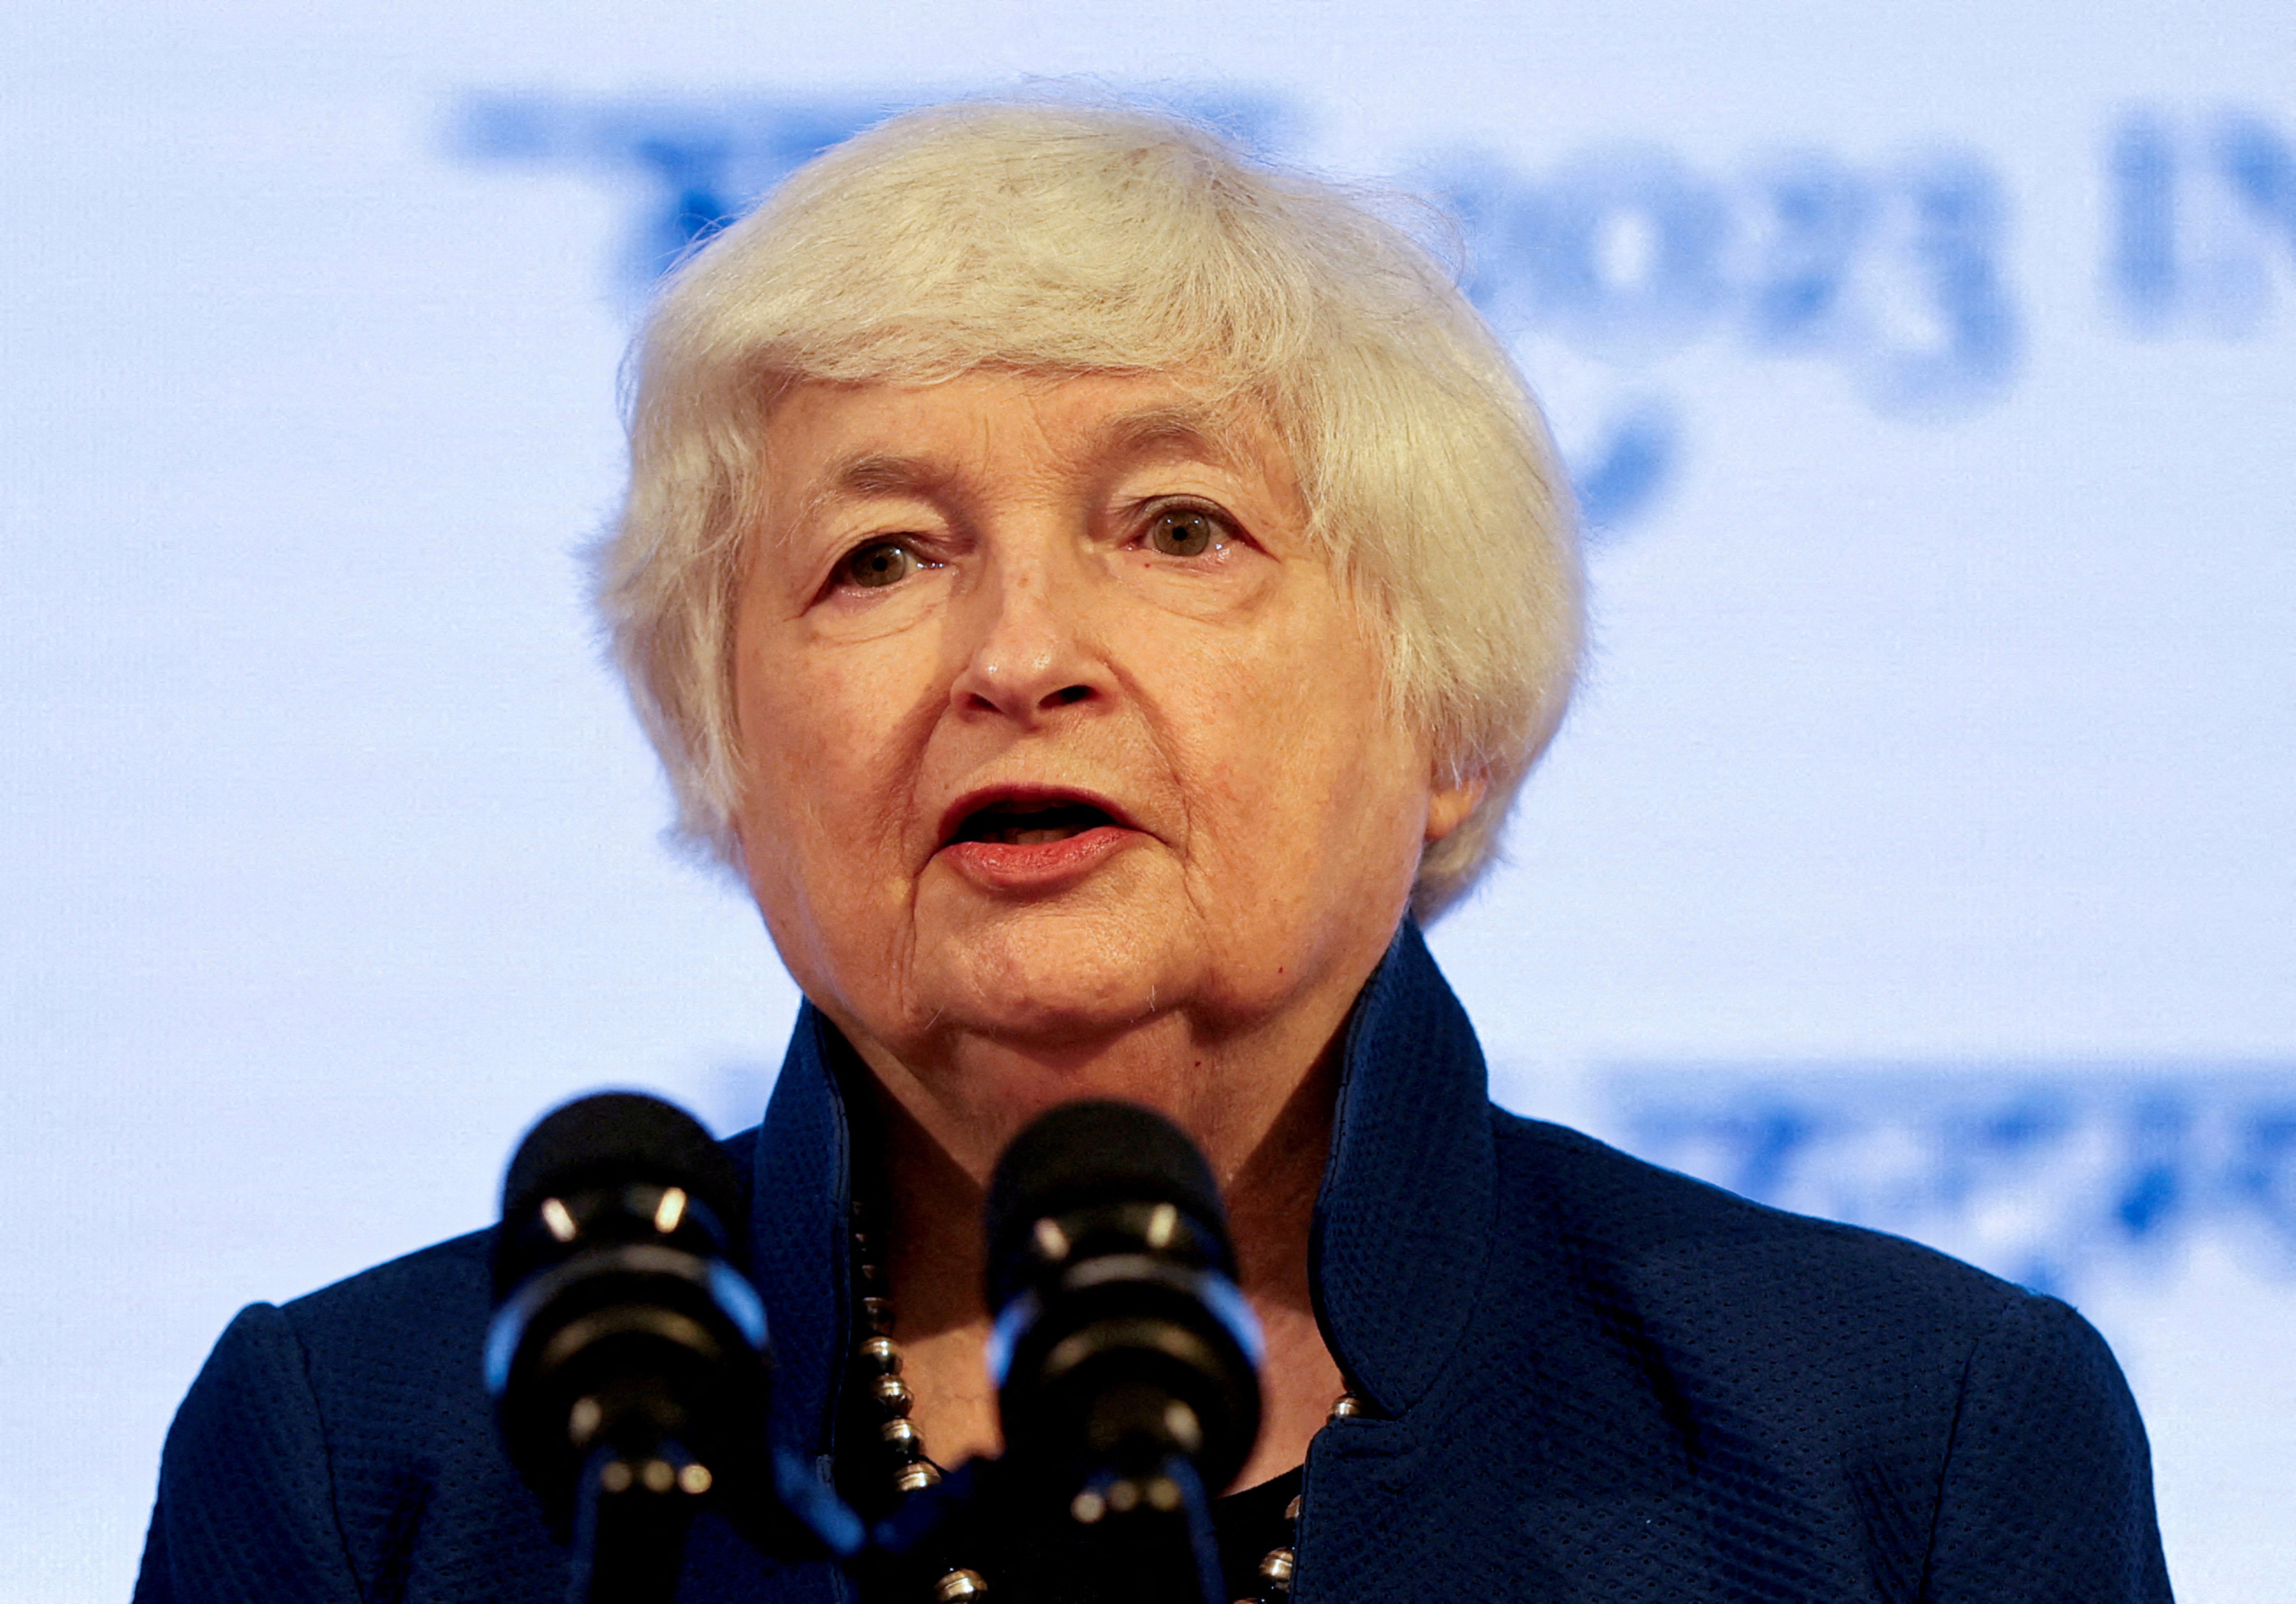 Yellen says US GDP is a “good, solid number” and may keep bond yields high